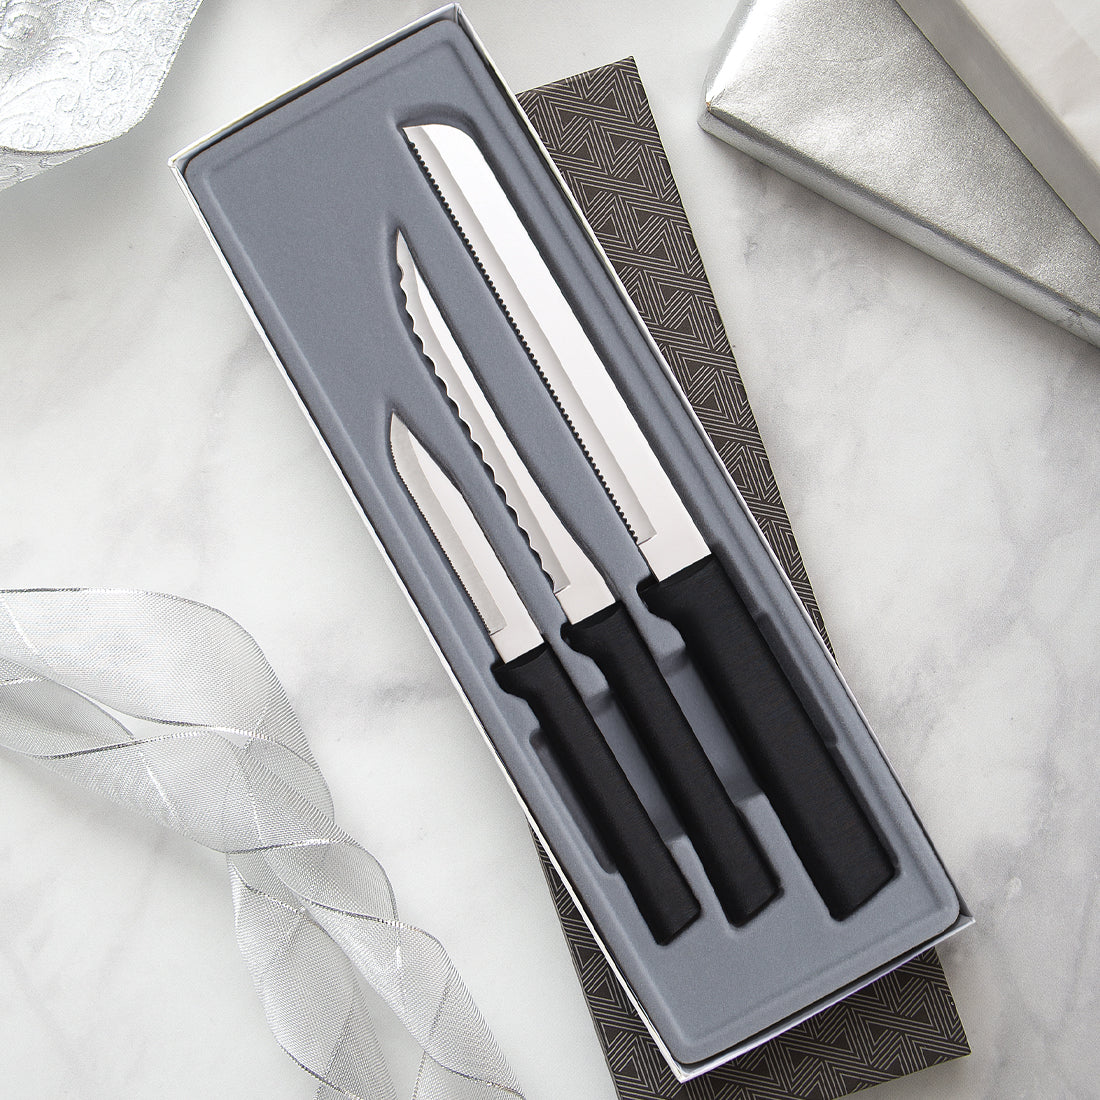 3 piece silver handled Sensational Serrations Gift Set on a white table.